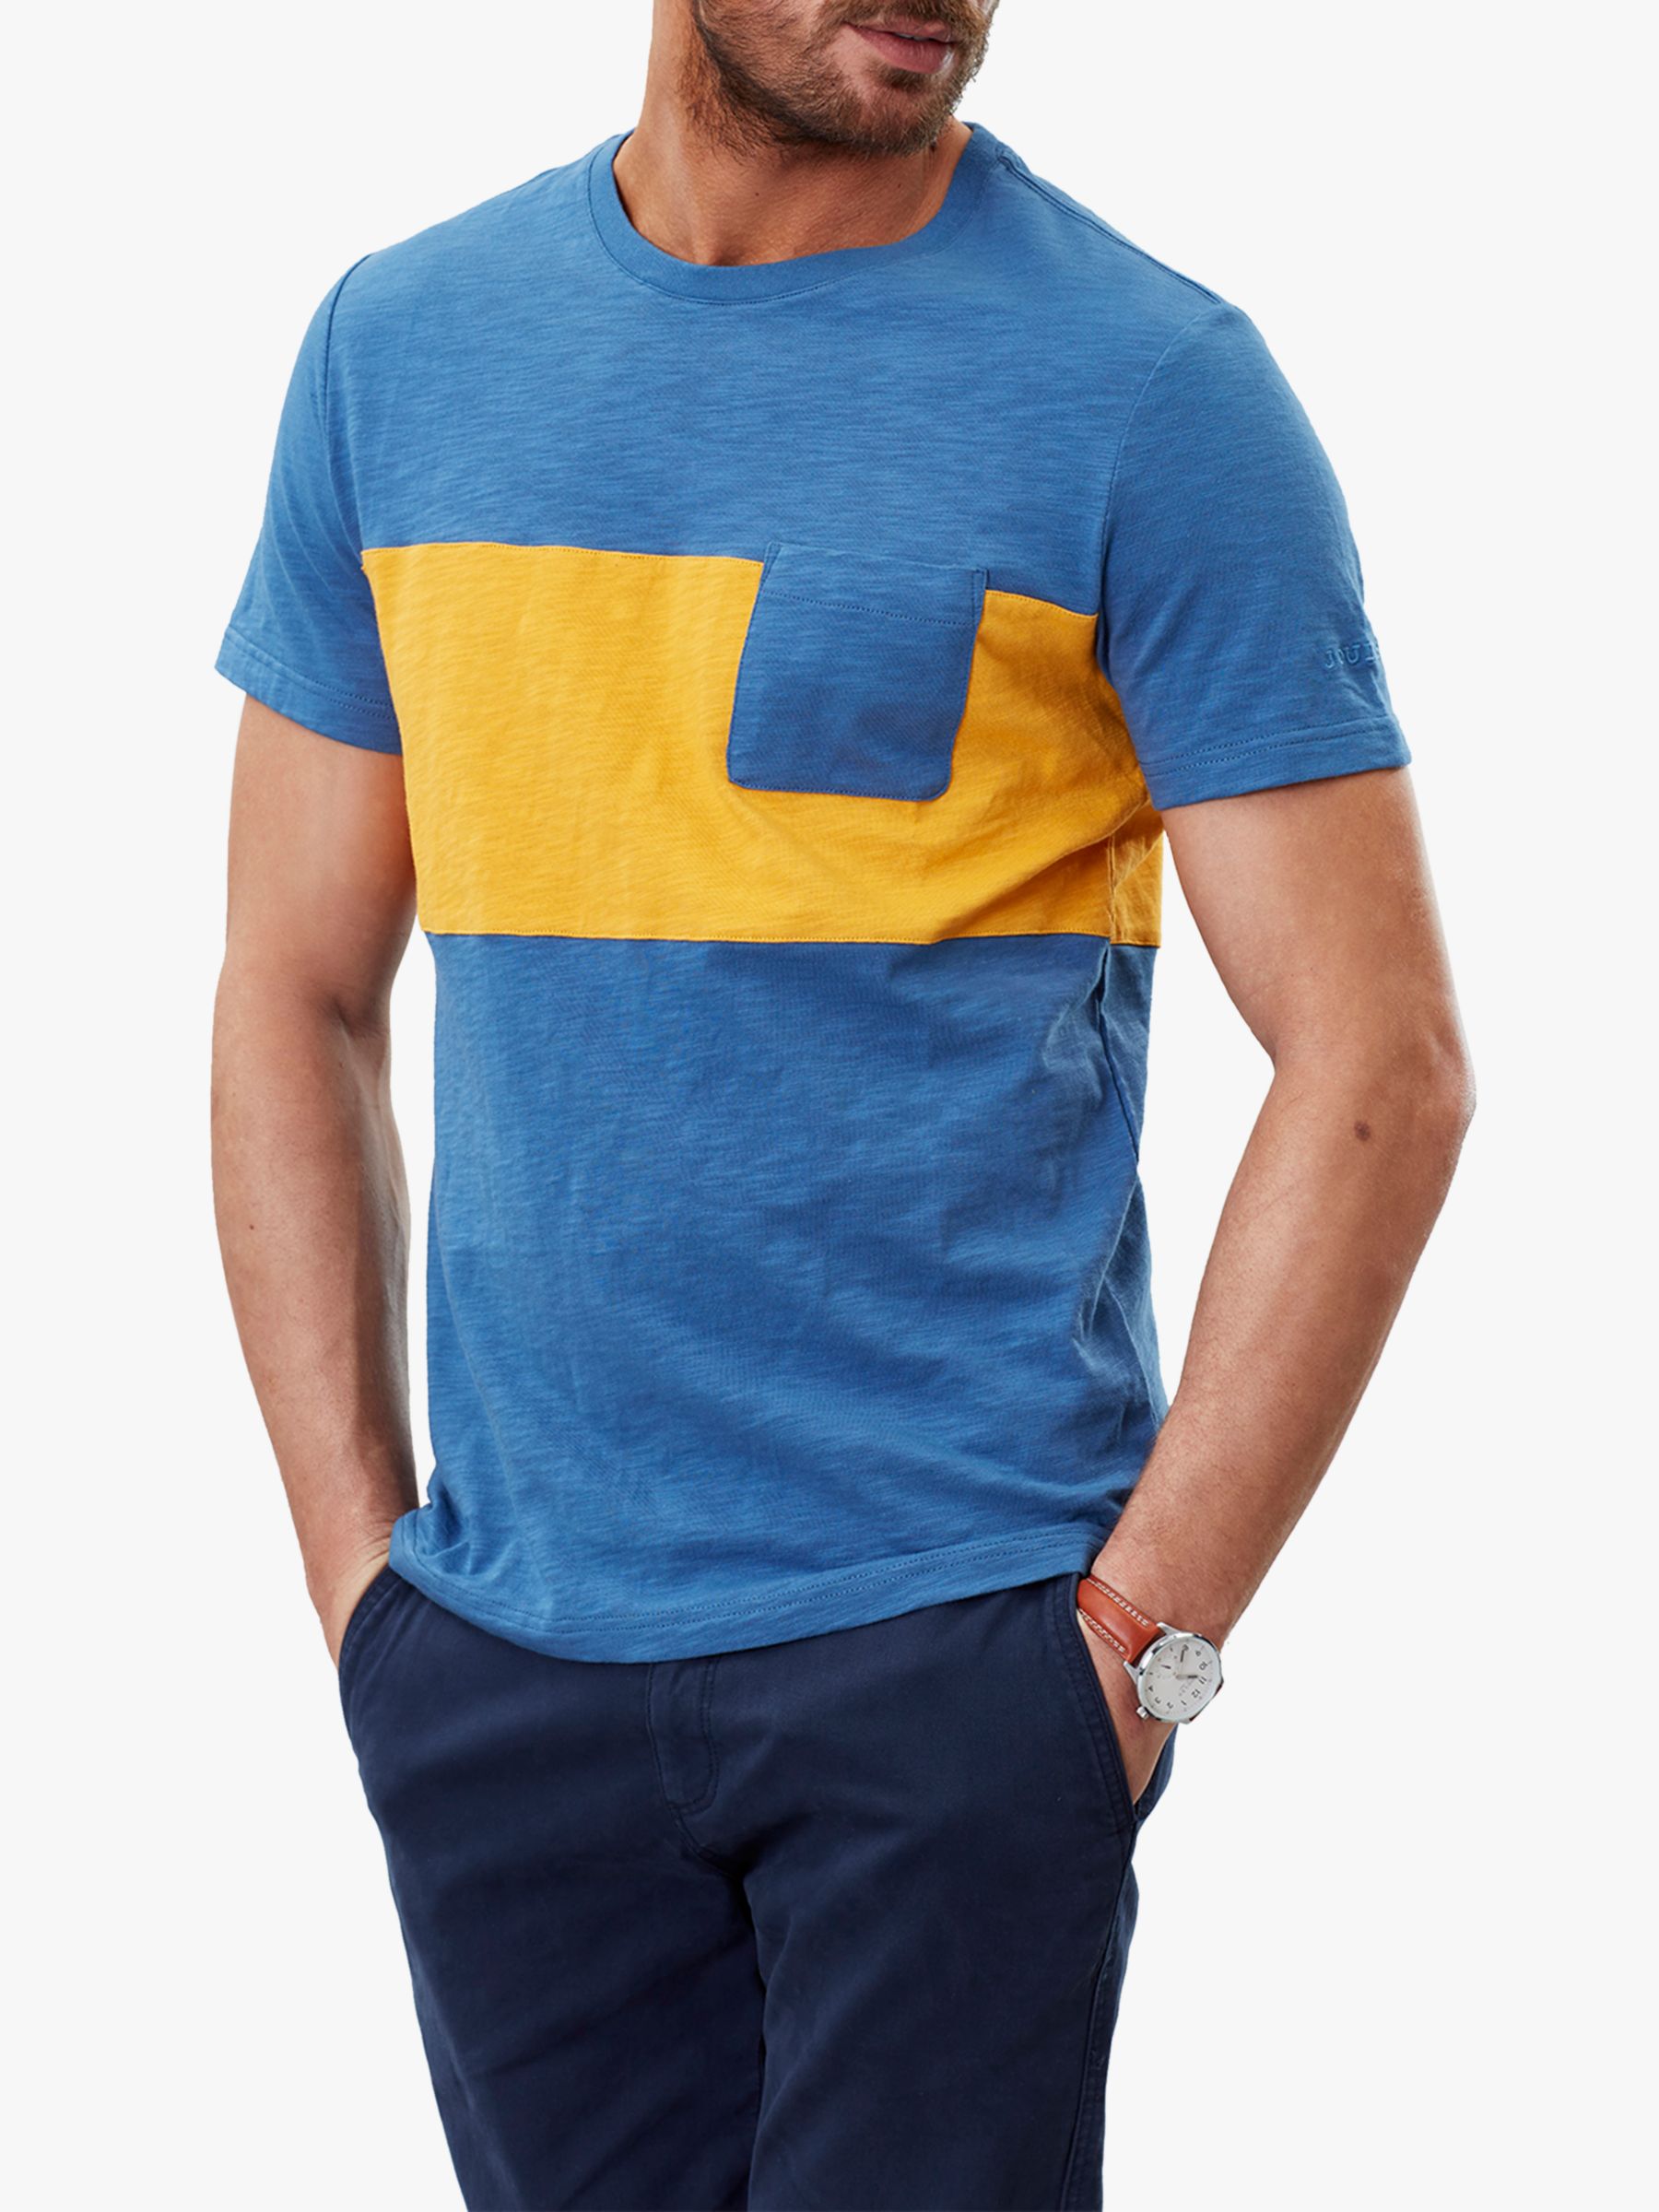 Joules Rugby T-Shirt